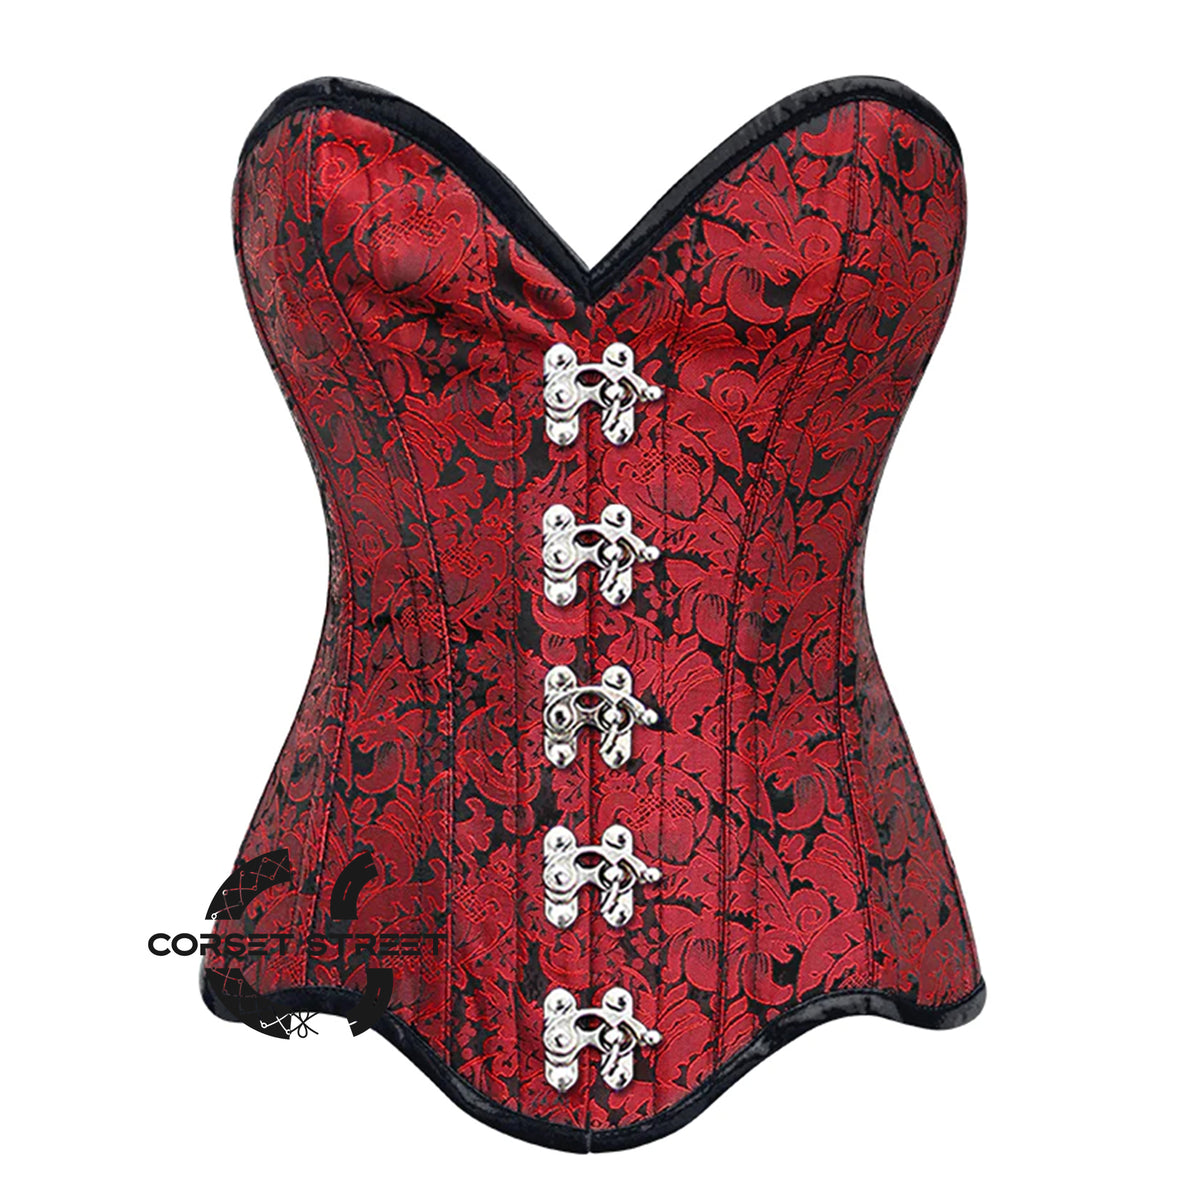 Red Brocade Bottom With Curvy Design Front Clasps Steampunk Gothic Overbust Corset